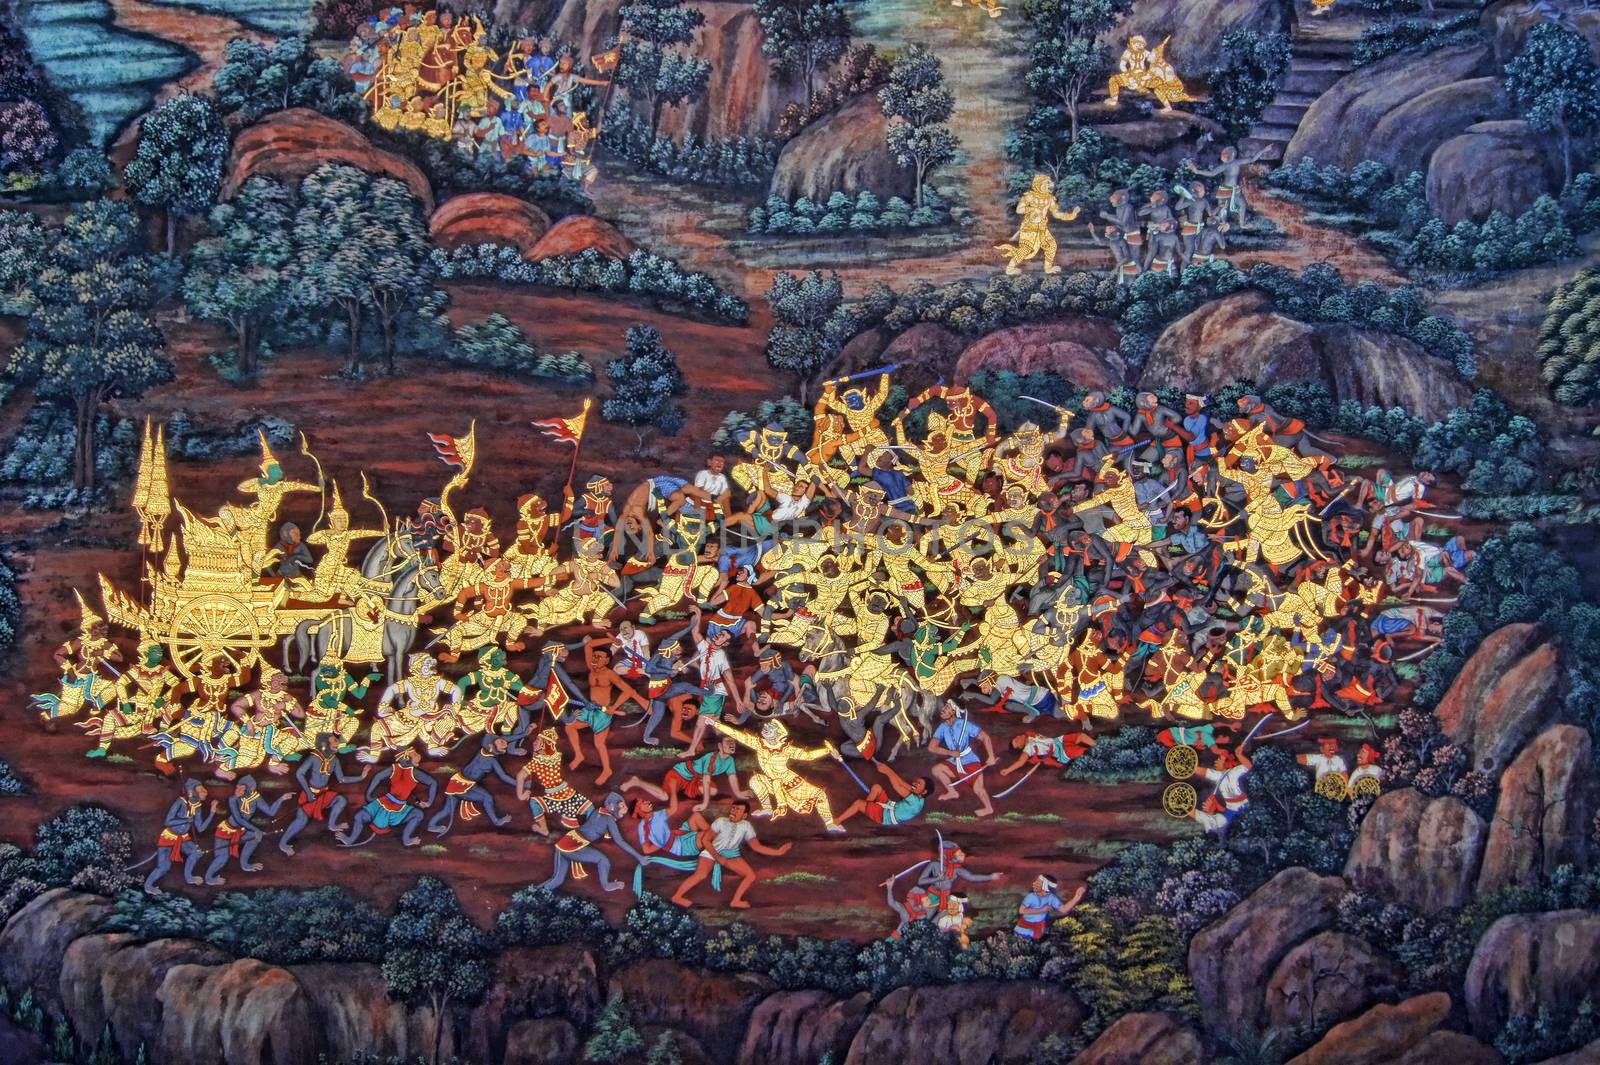 Masterpiece Ramayana painting in temple of emerald Buddha in Grand Palace in Thailand